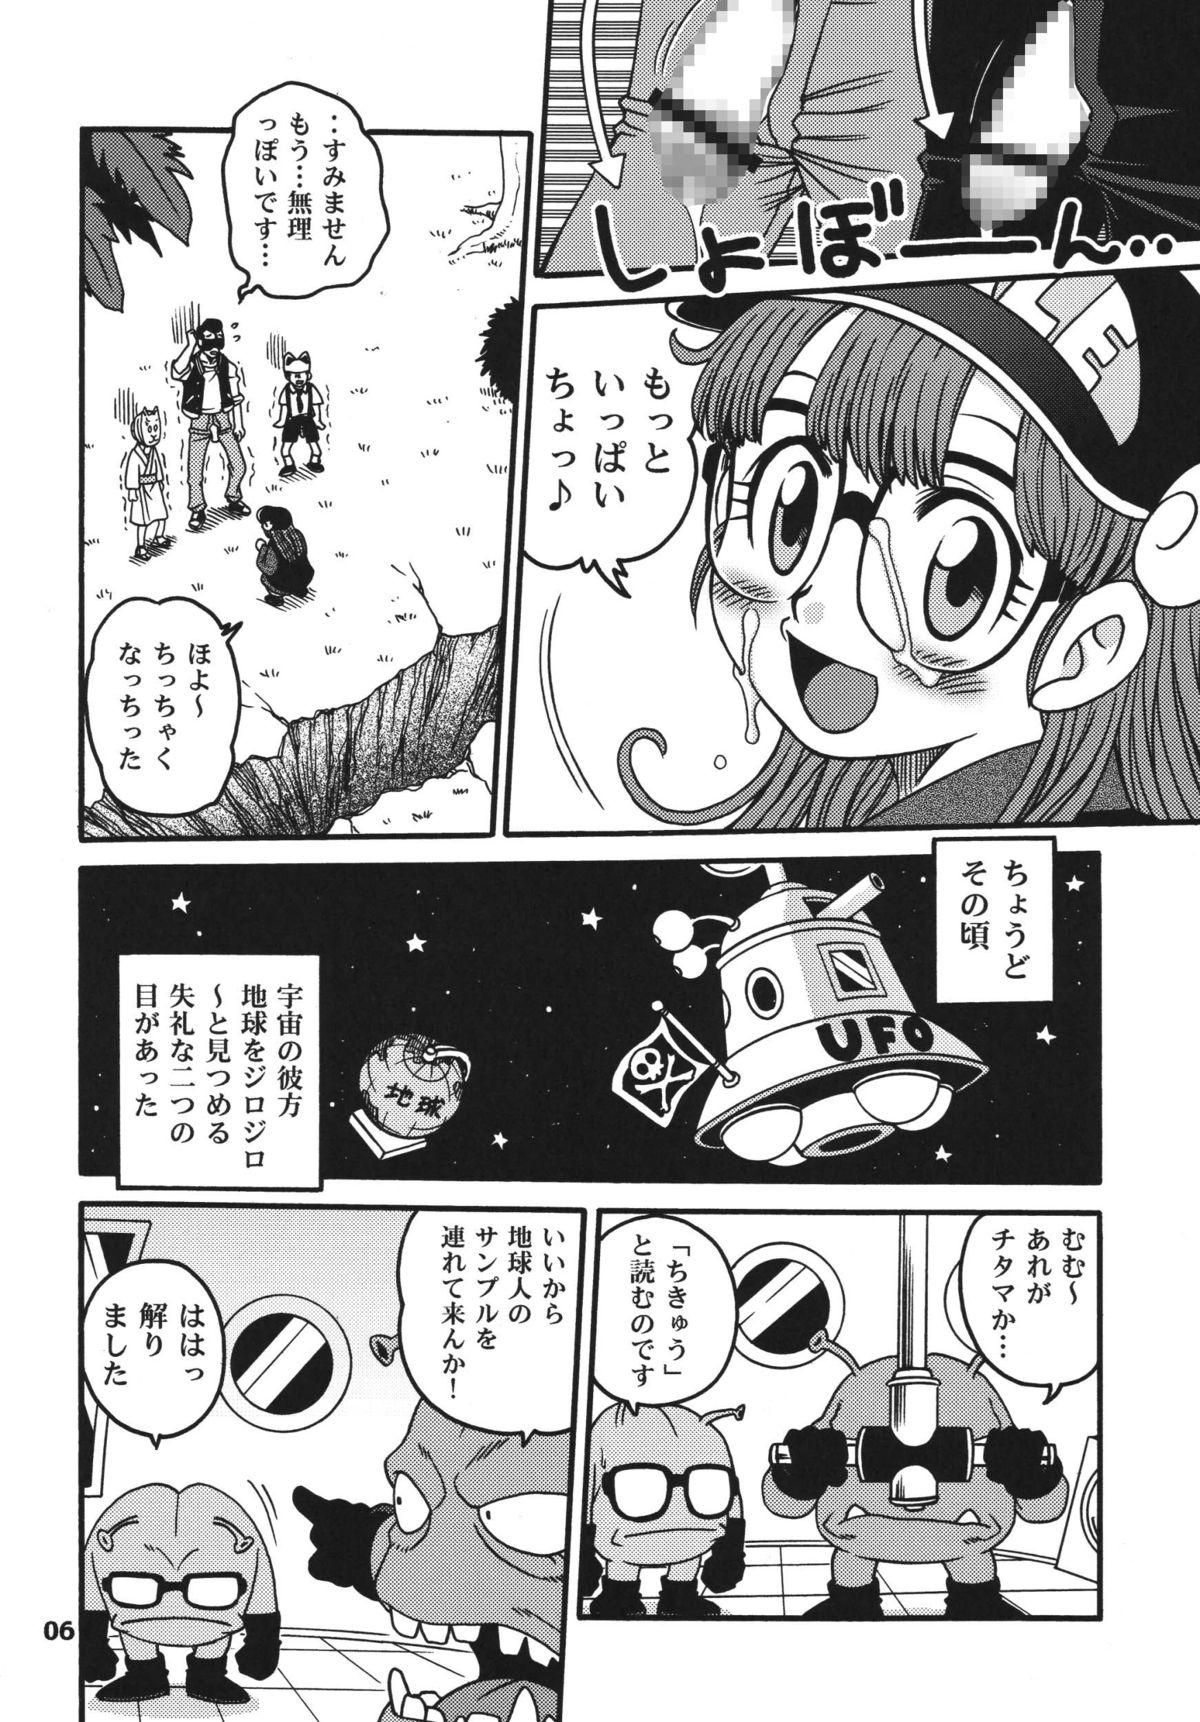 Gaystraight Project Arale 2 - Dr. slump Club - Page 6